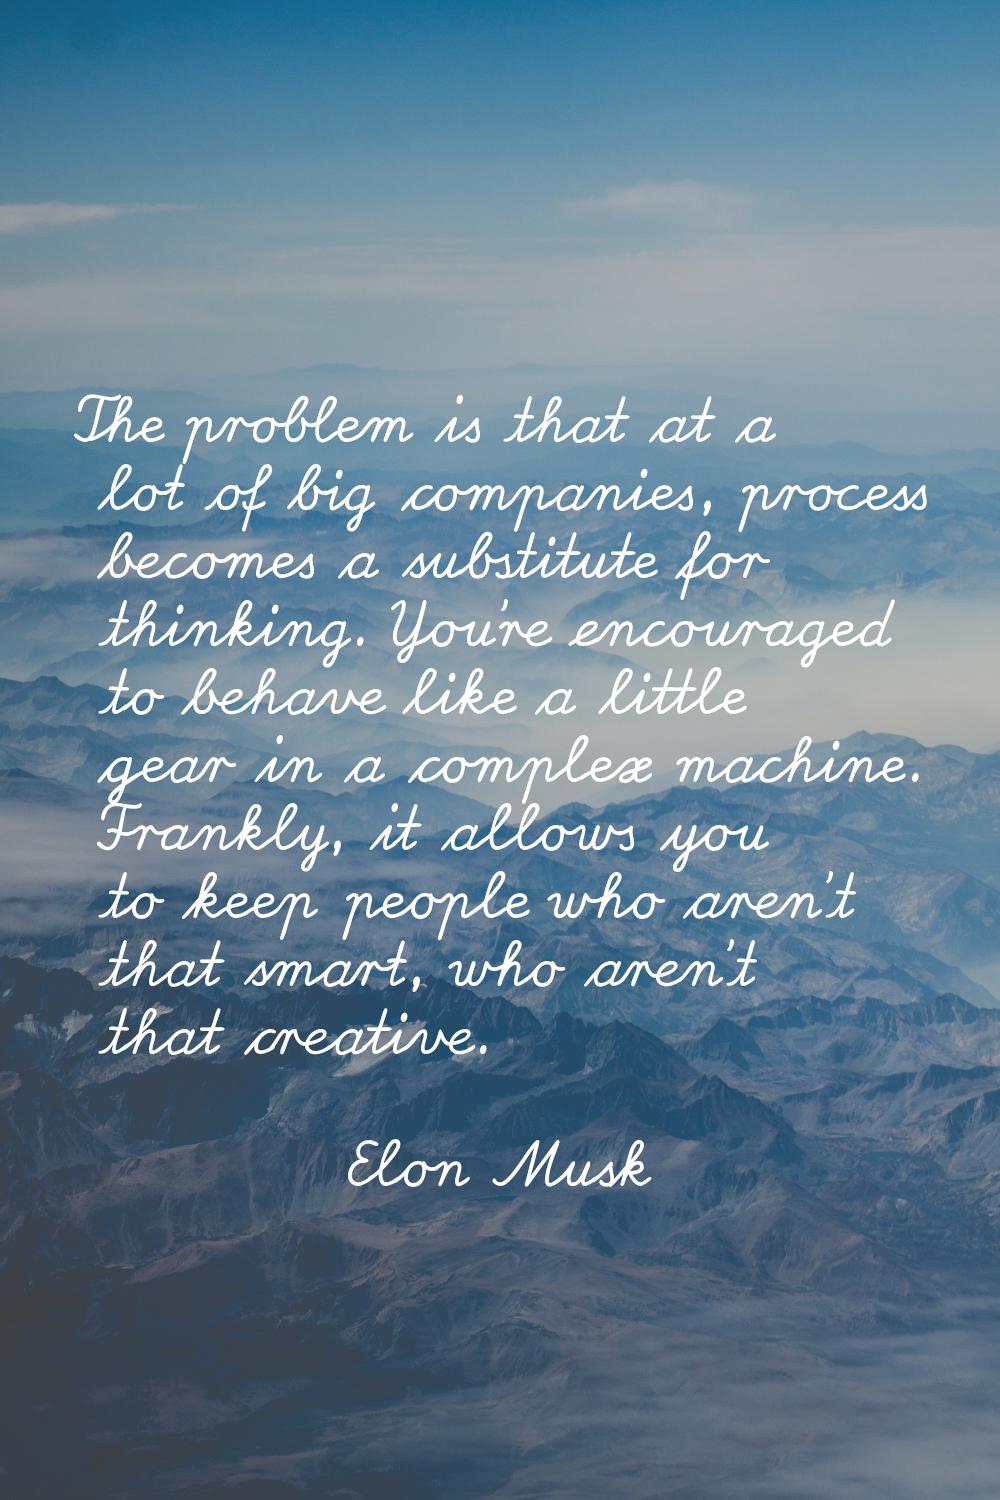 The problem is that at a lot of big companies, process becomes a substitute for thinking. You're en